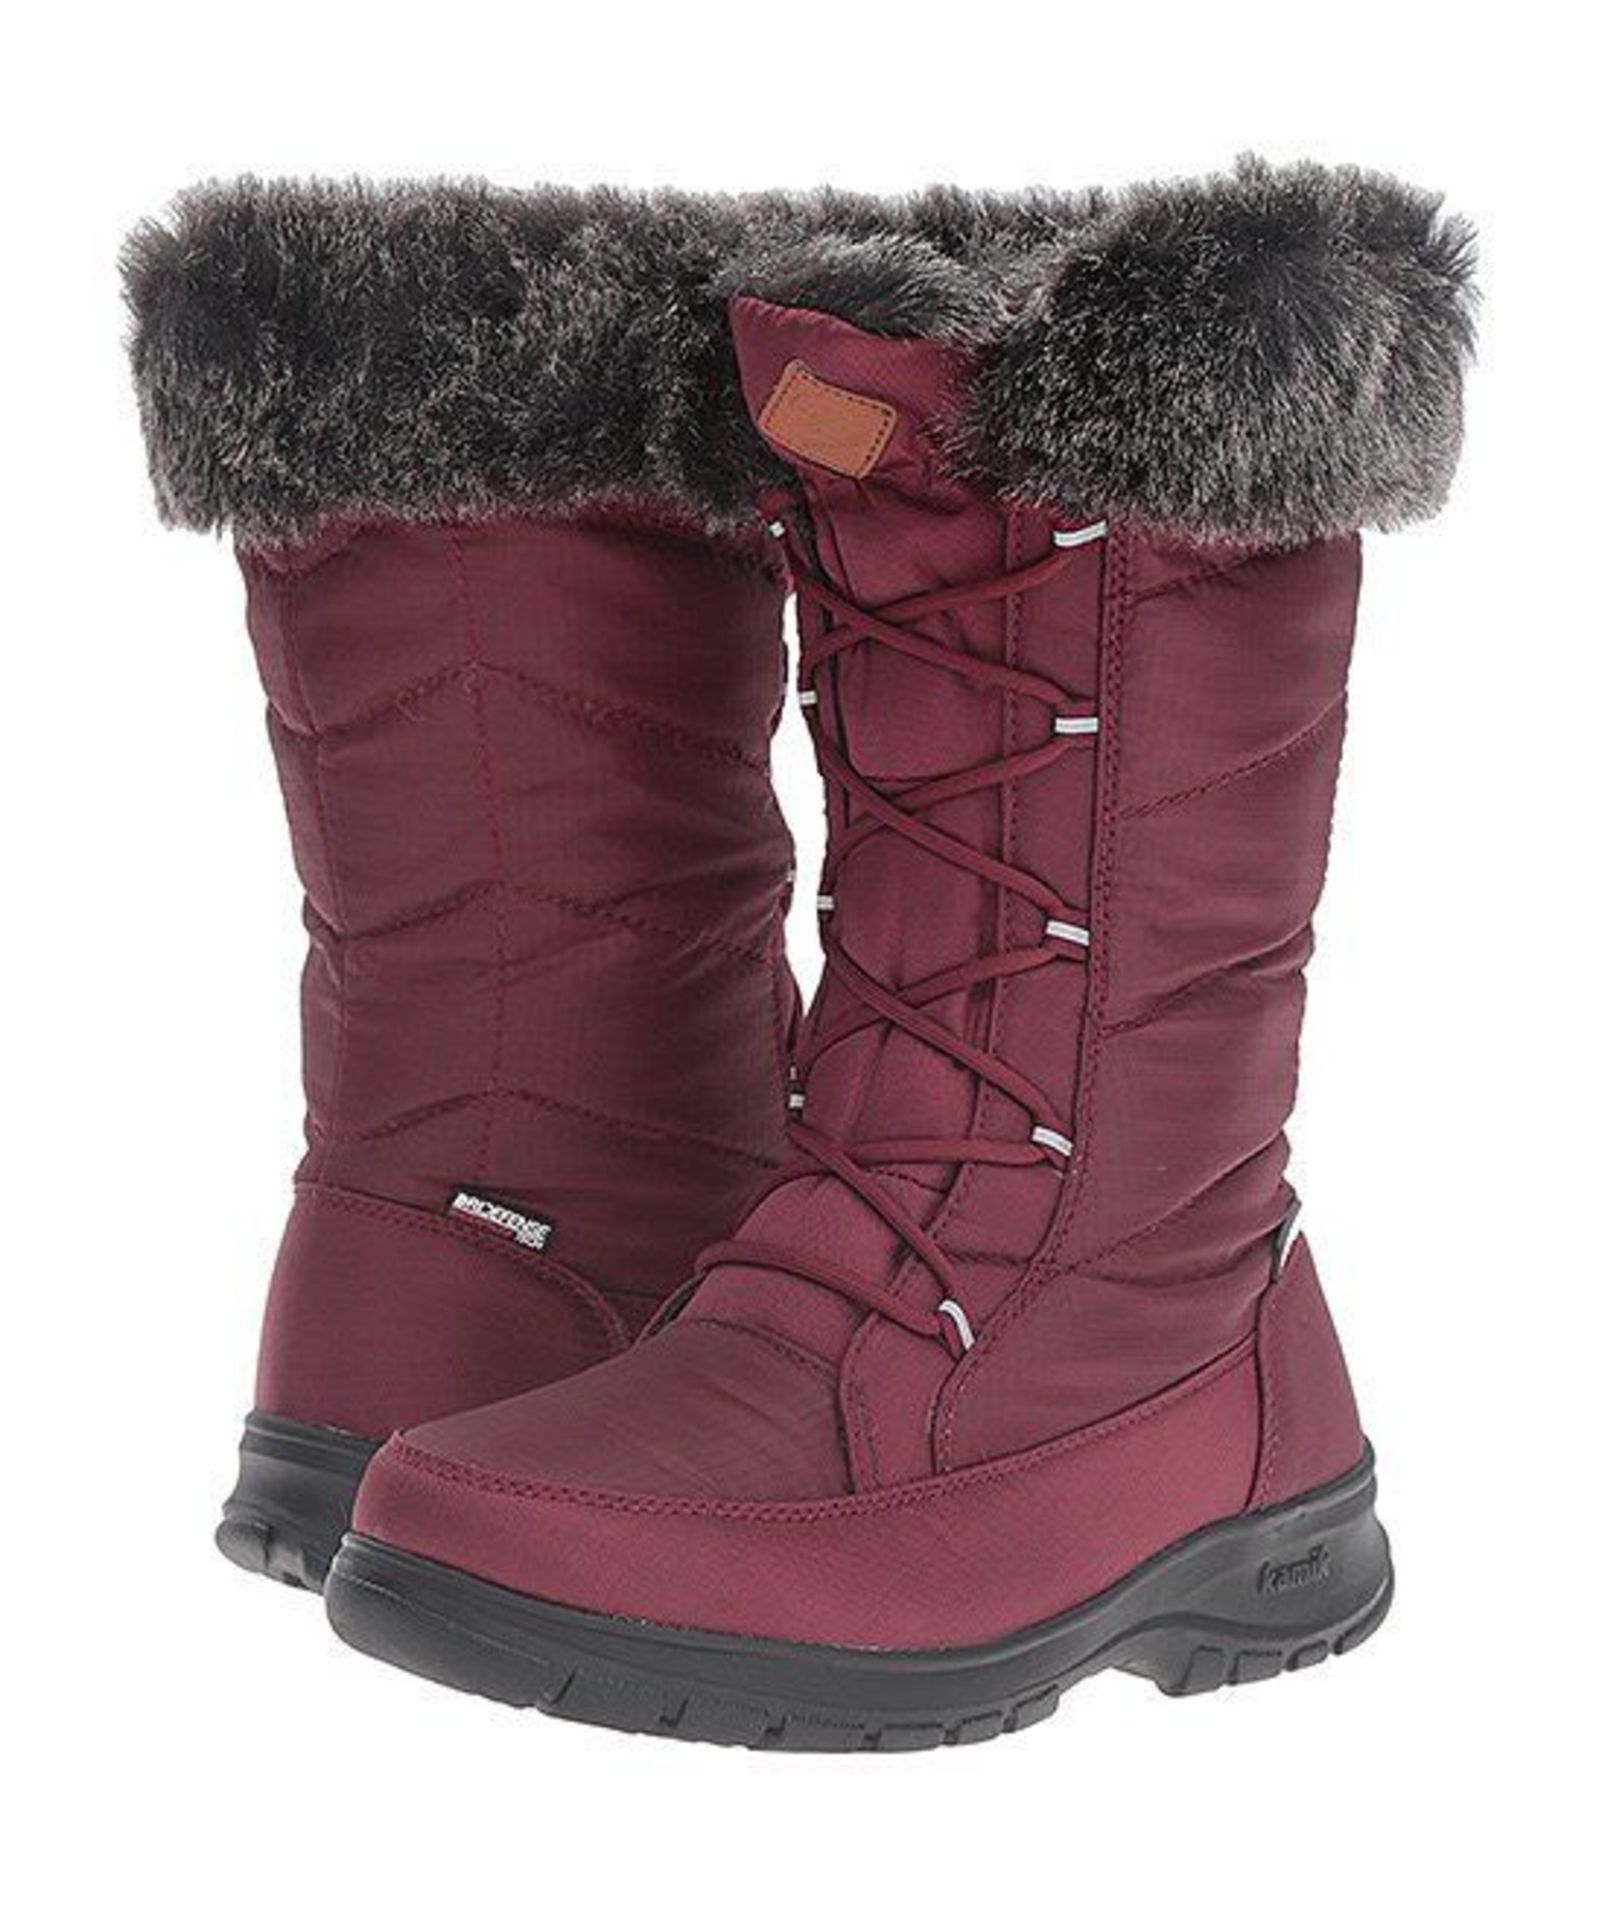 Kamik Burgundy Yonkers Boot (Uk Size 6:Us Size 8) (New with box) [Ref: 51071187-I-001]